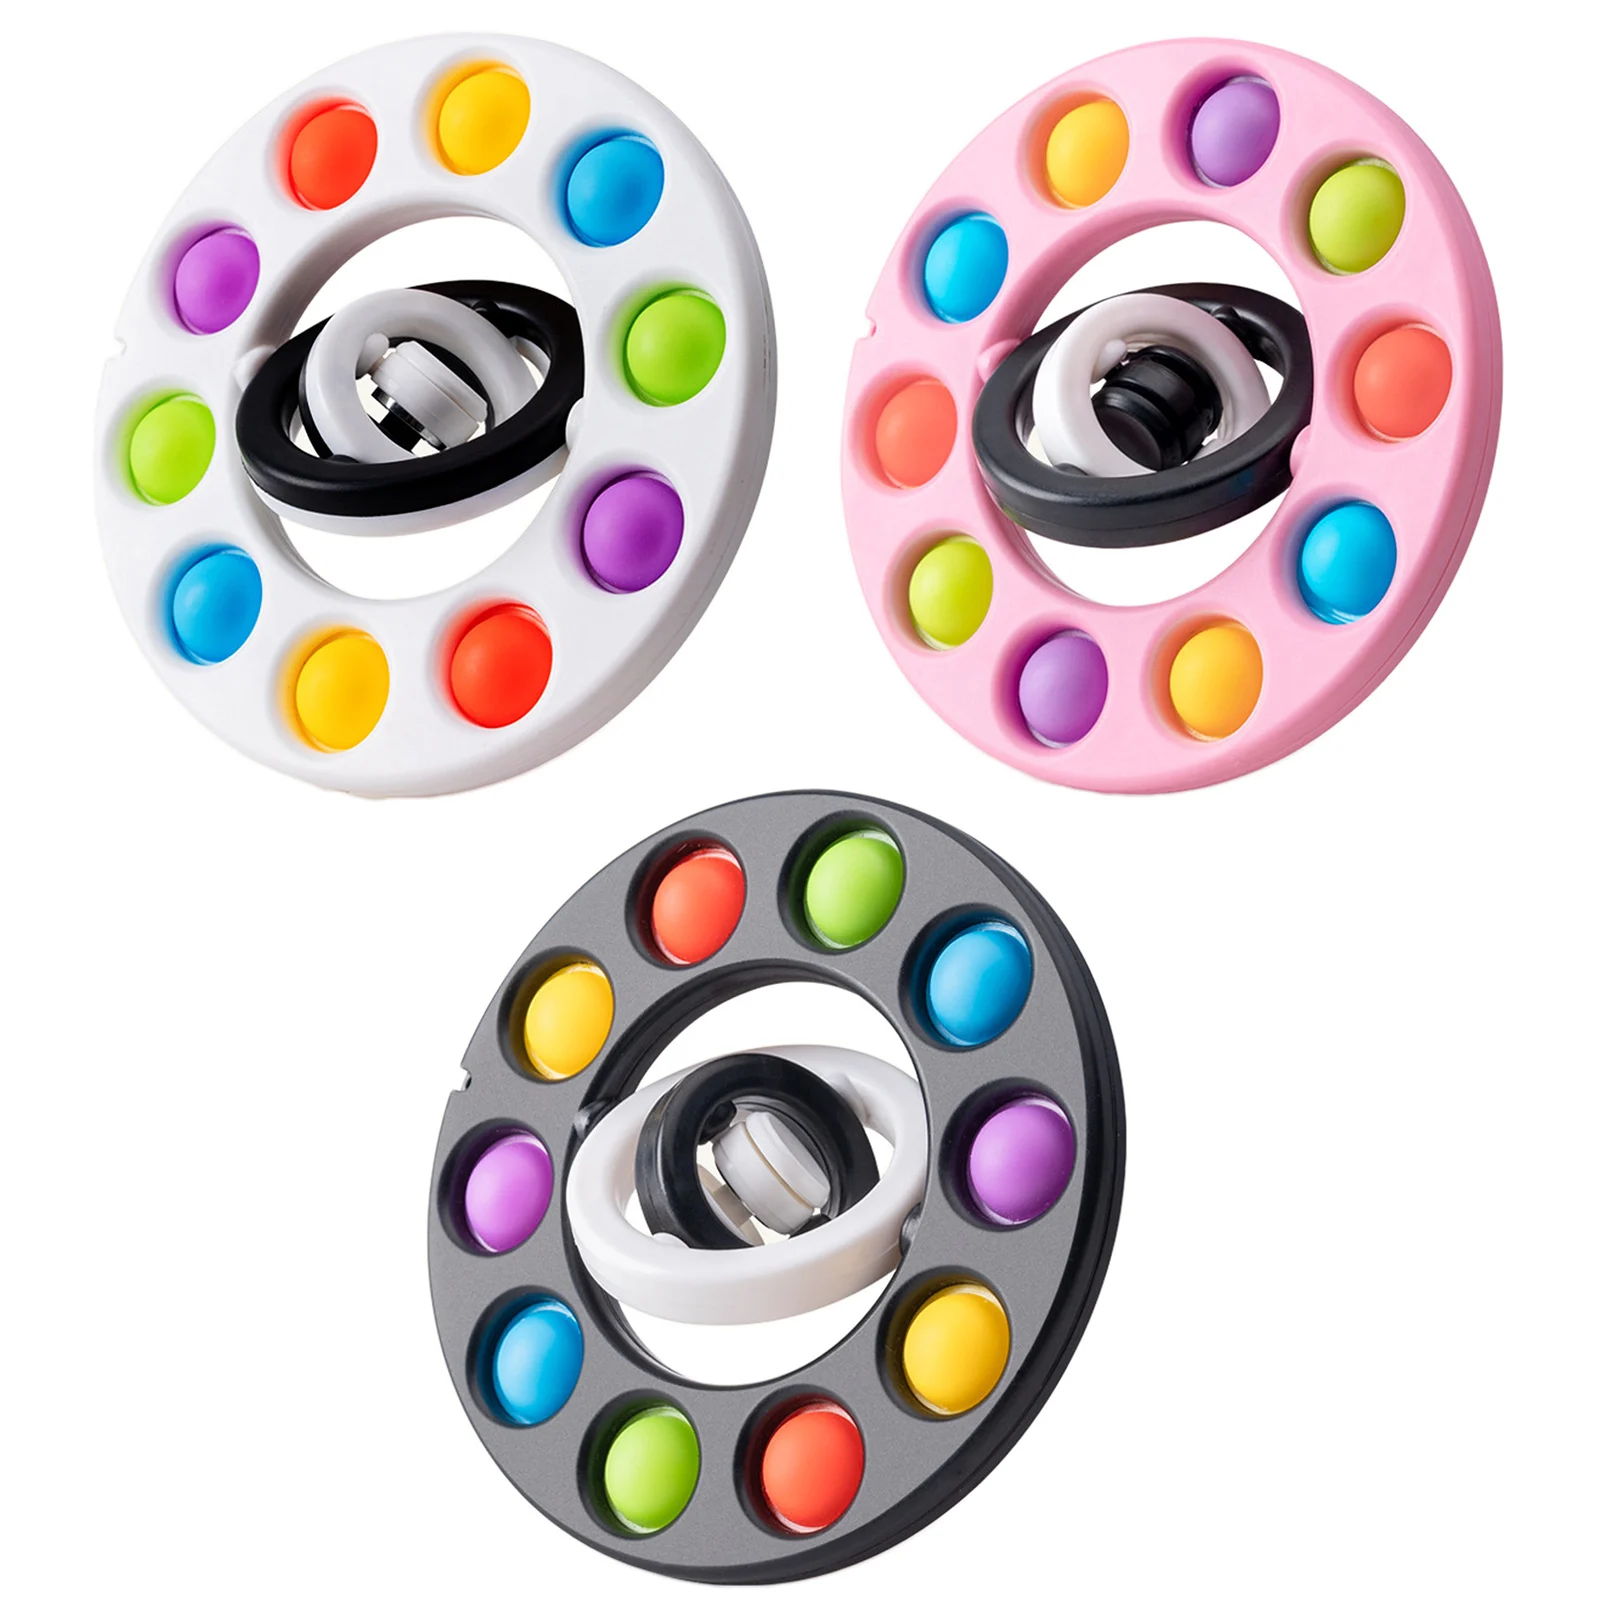 

Simple Dimples Fidgets Toy Colorful Push Bubbles Squeezy Balls Fingertip Spinner Flip Antistress Anxiety Relief Sensory Toy